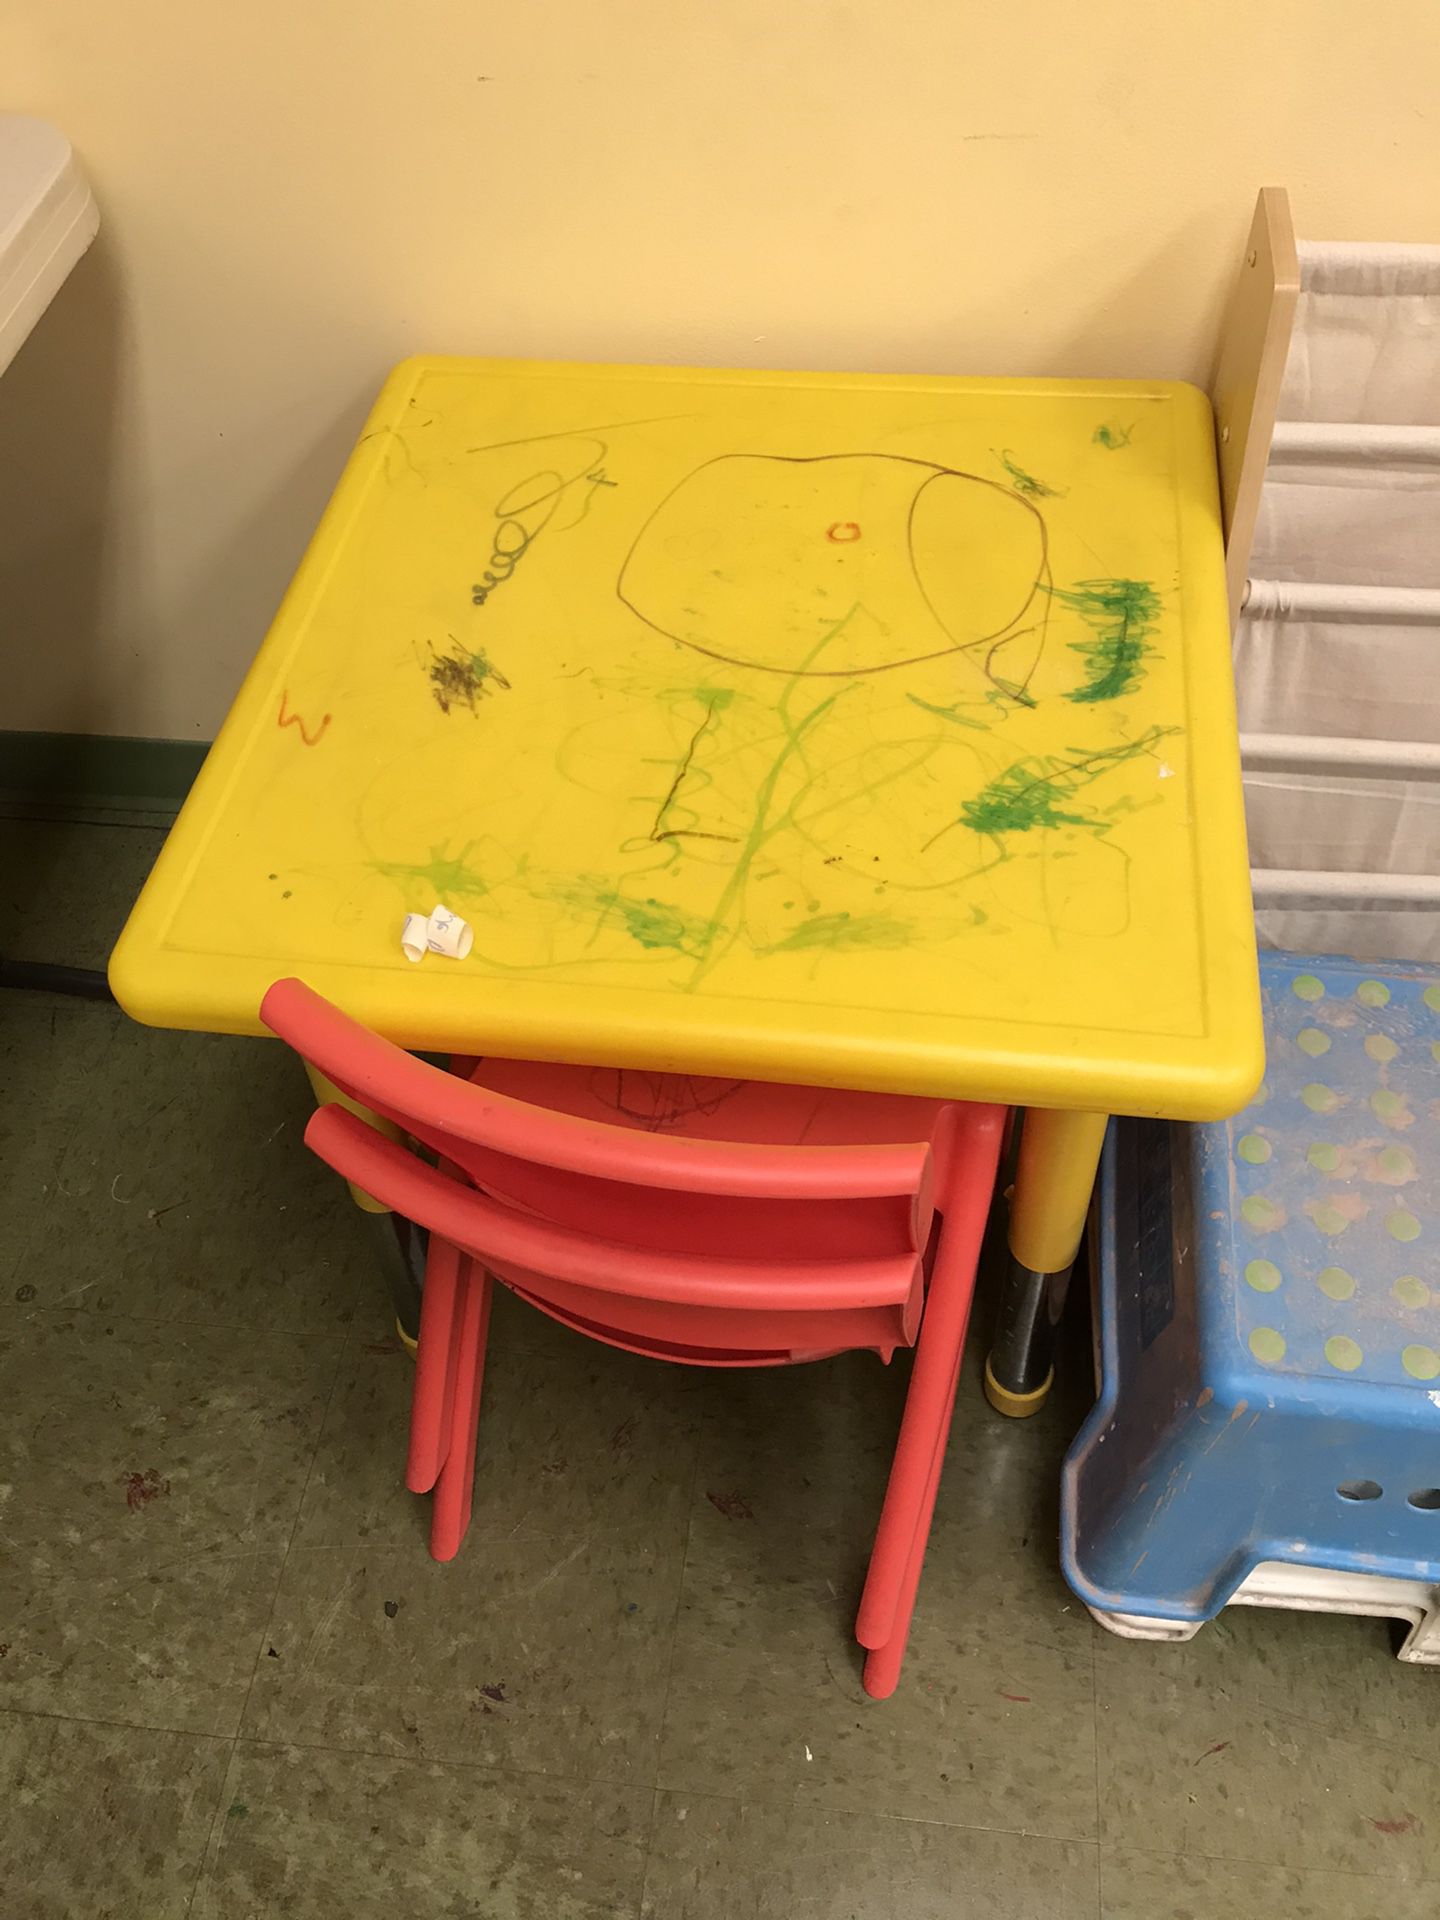 Kids table with 2 chairs. Saturday only 9/19/20